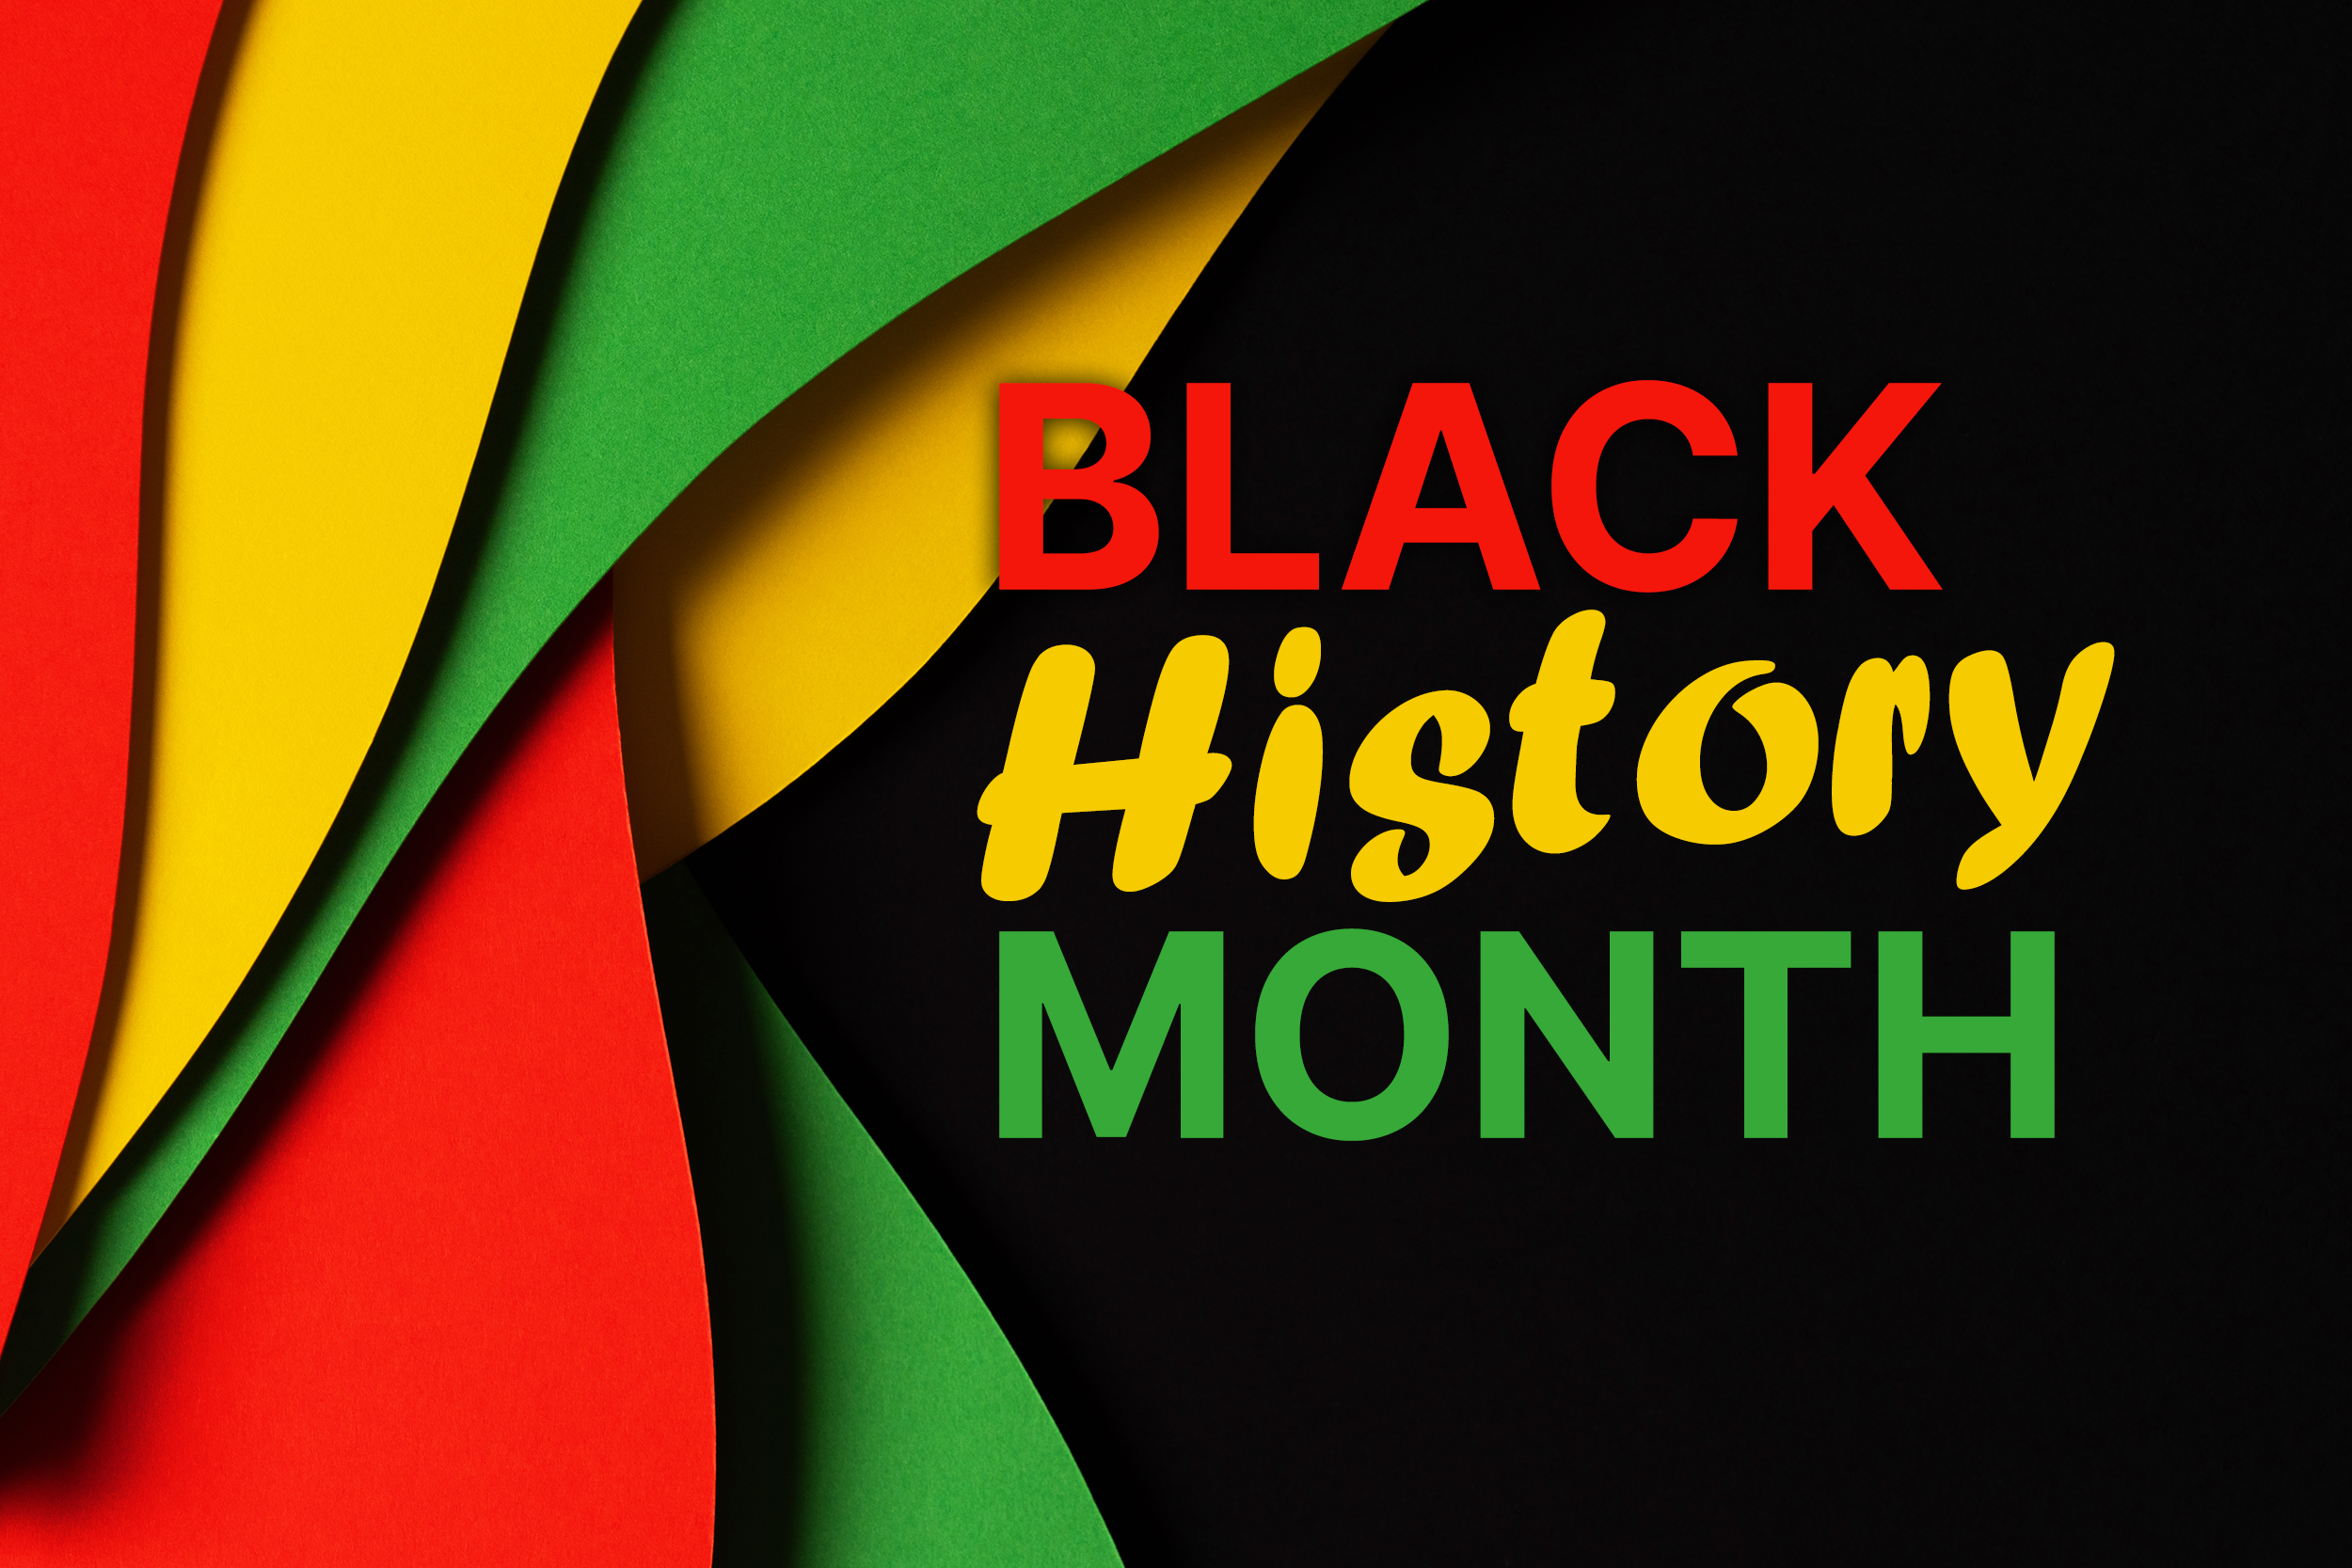 "Black History Month" with red, yellow and green banner.